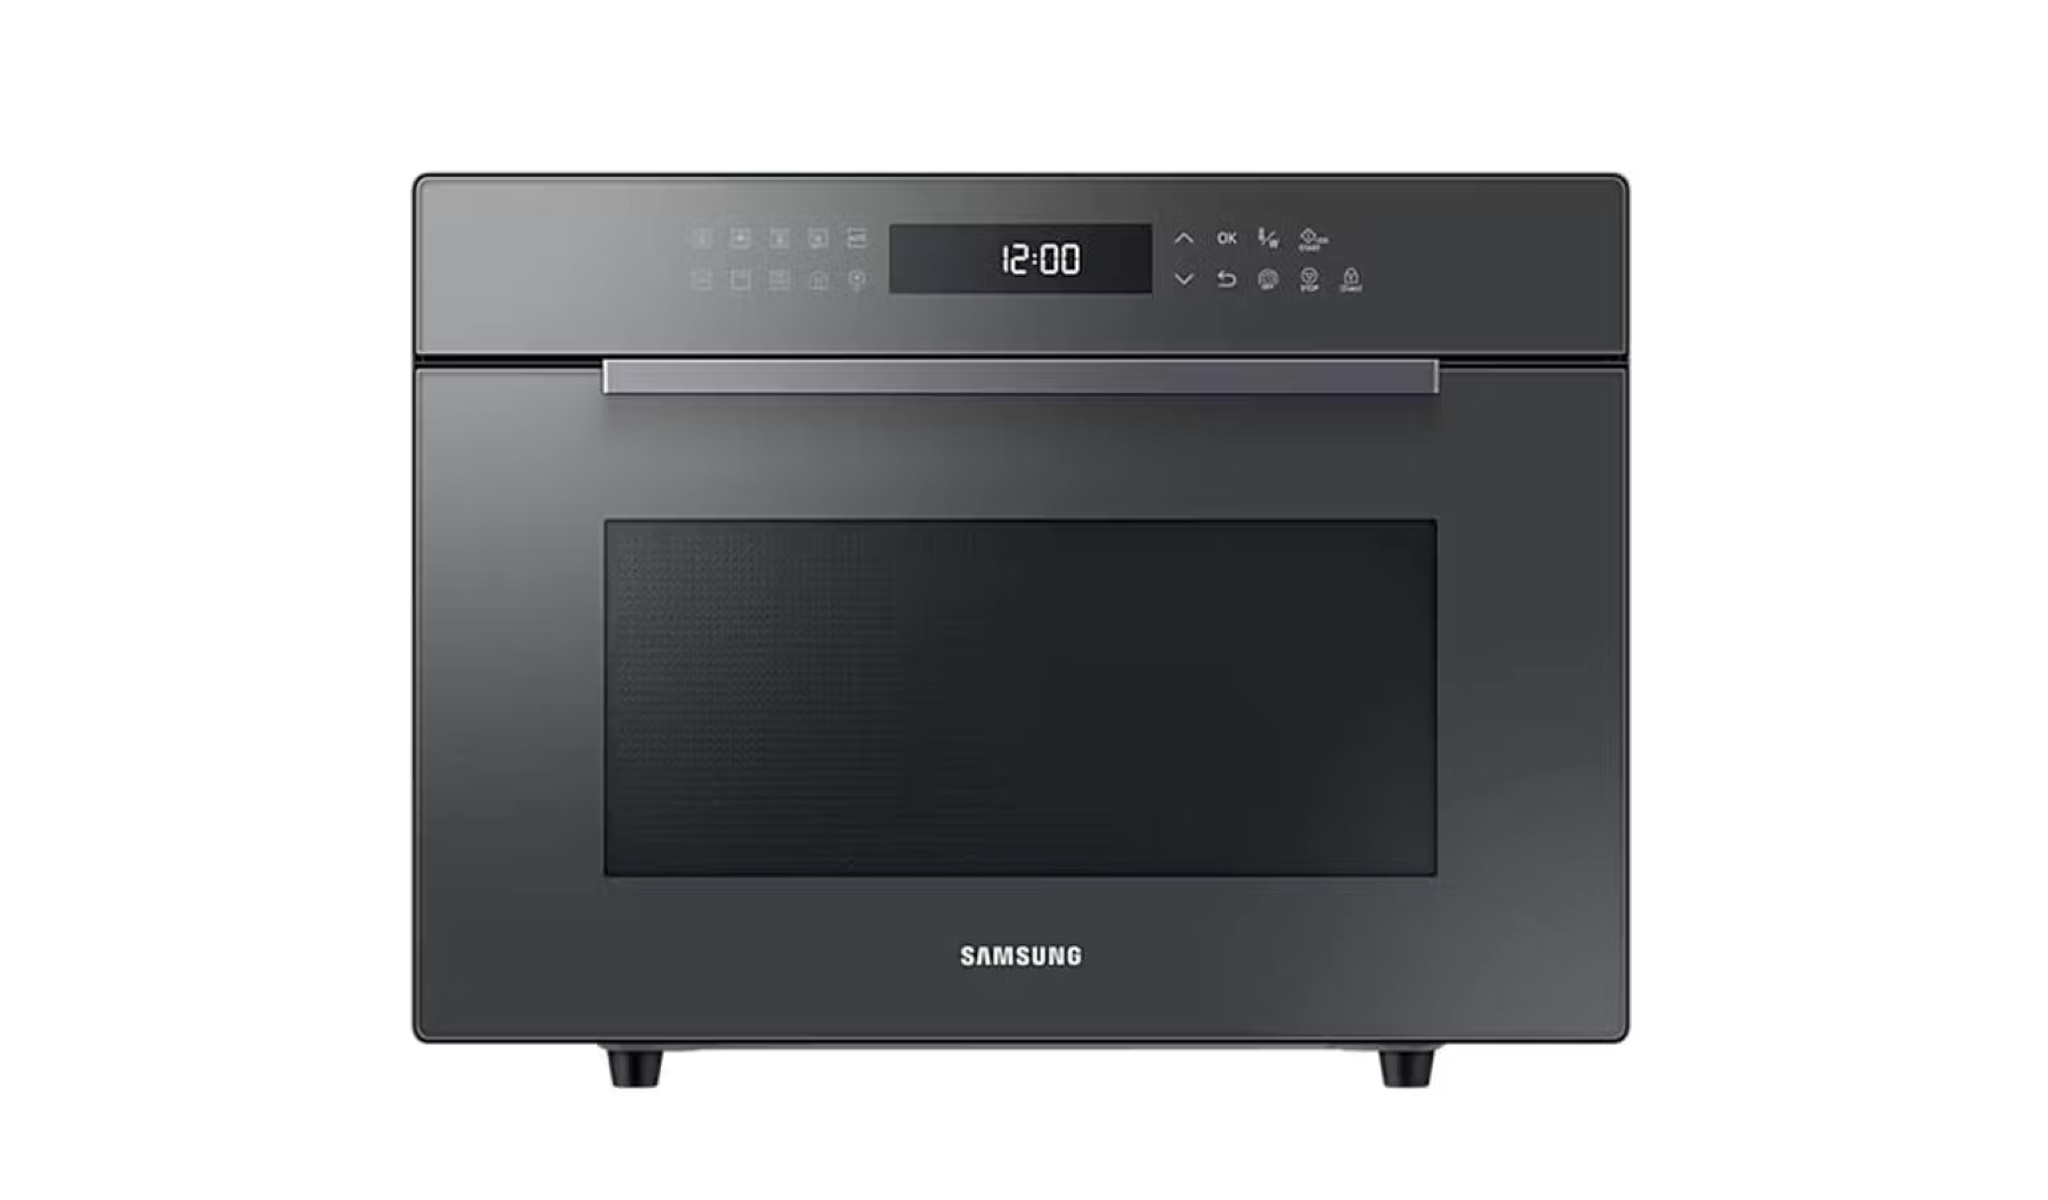 How To Fix The Error Code E-58 For Samsung Convection Oven